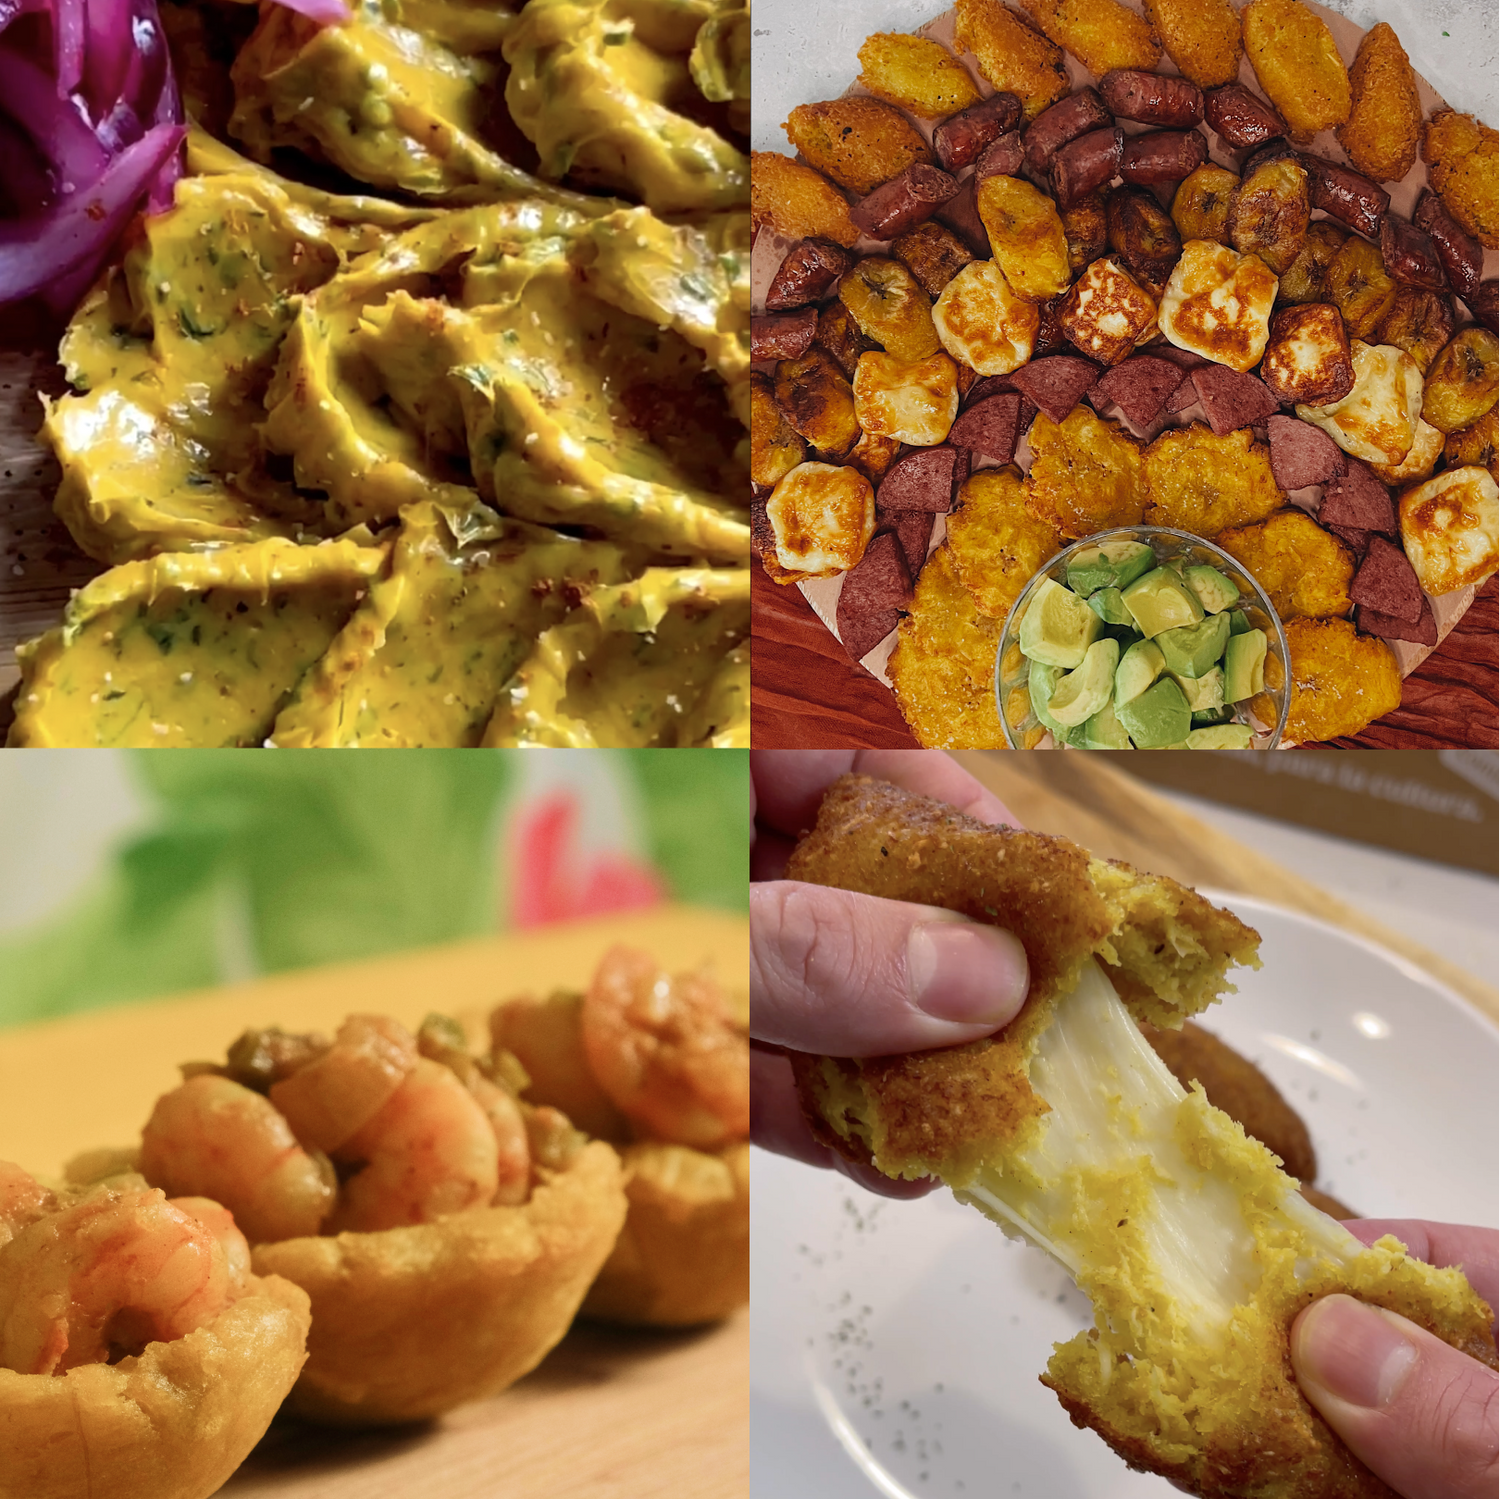 5 Shareable Latin Dishes to Bring to the Potluck